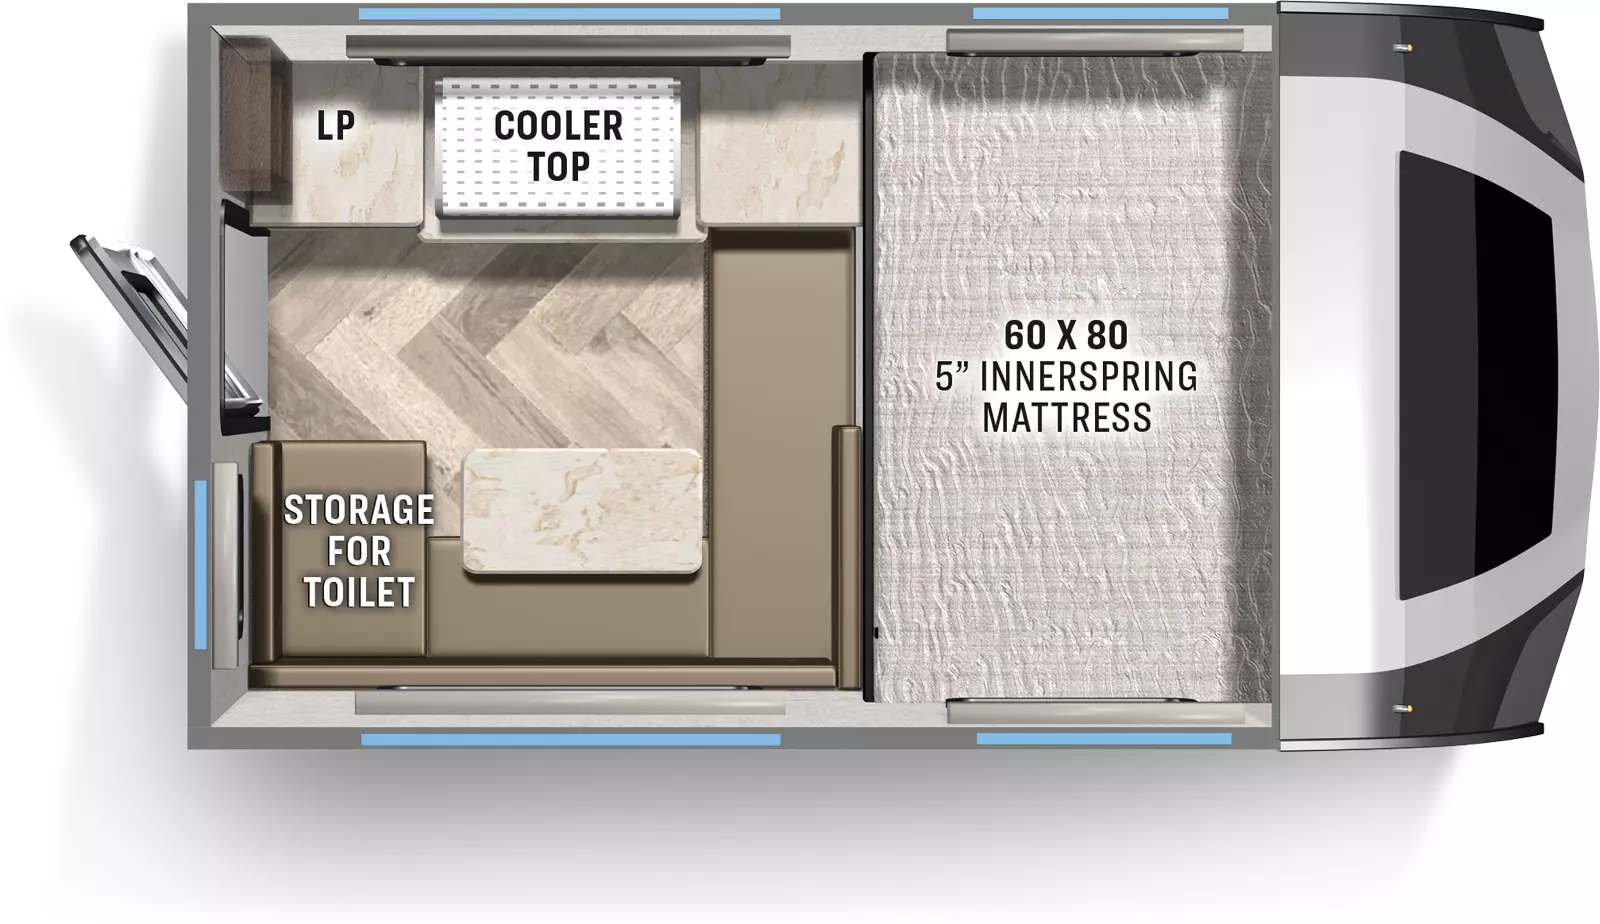 The HS-780 has zero slideouts and one entry at the rear. Interior layout front to back: front 60 x 80 5" innerspring mattress; rear off-door side cooler top and LP; rear door side seating area, table, and storage for toilet.